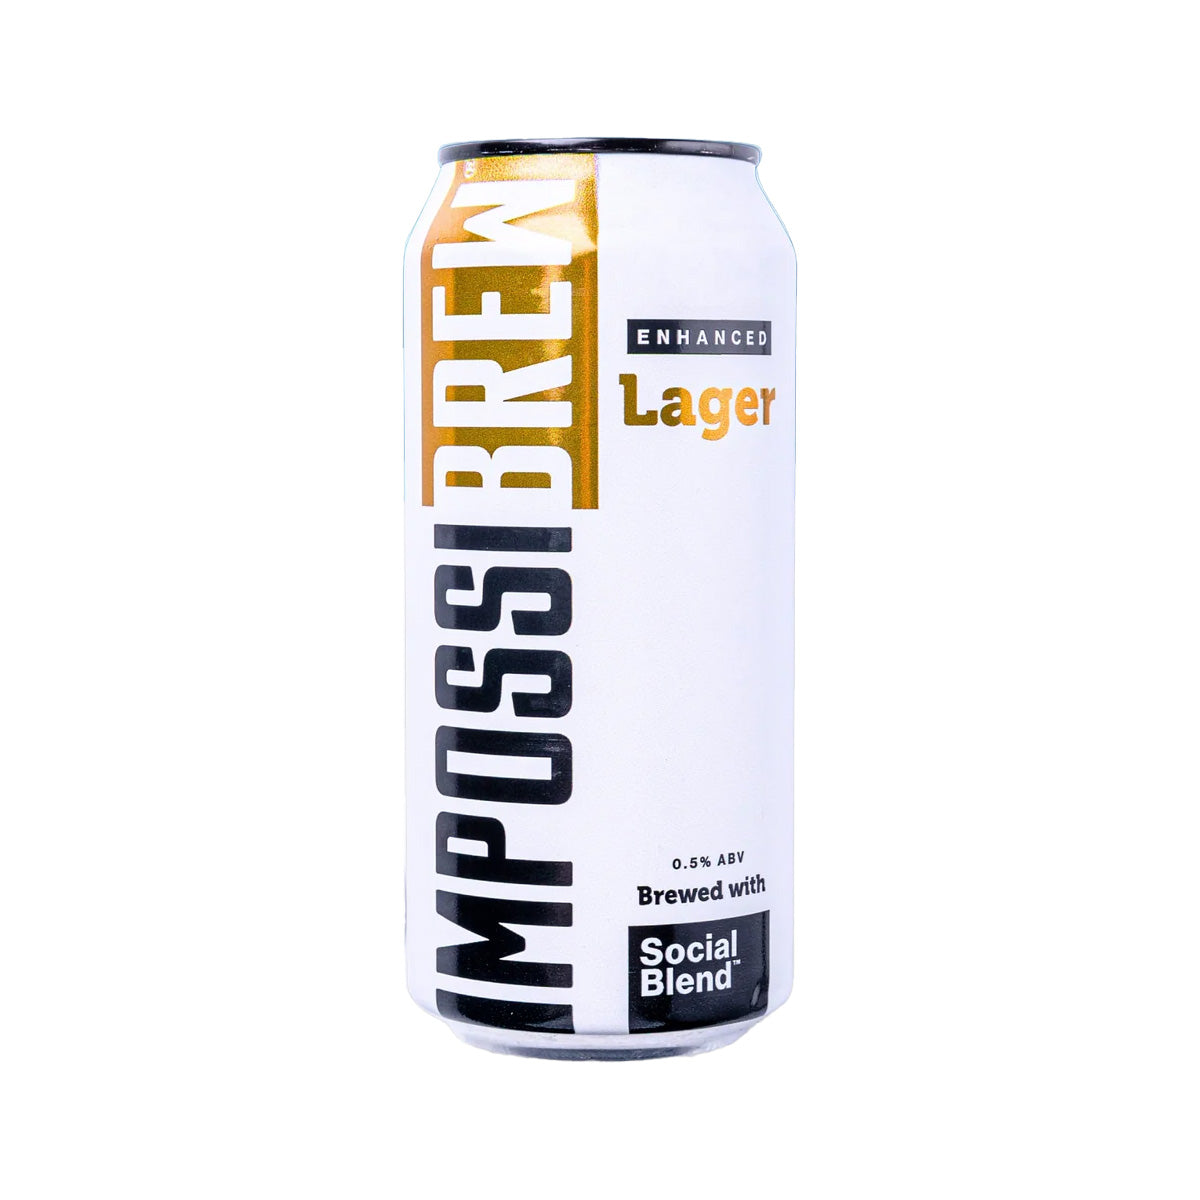 Dry Drinker's Energise & Unwind Combo: 4 x Collider Lager | ImpossBrew Lager & Pale Ale Duo | Three Spirit NightCap